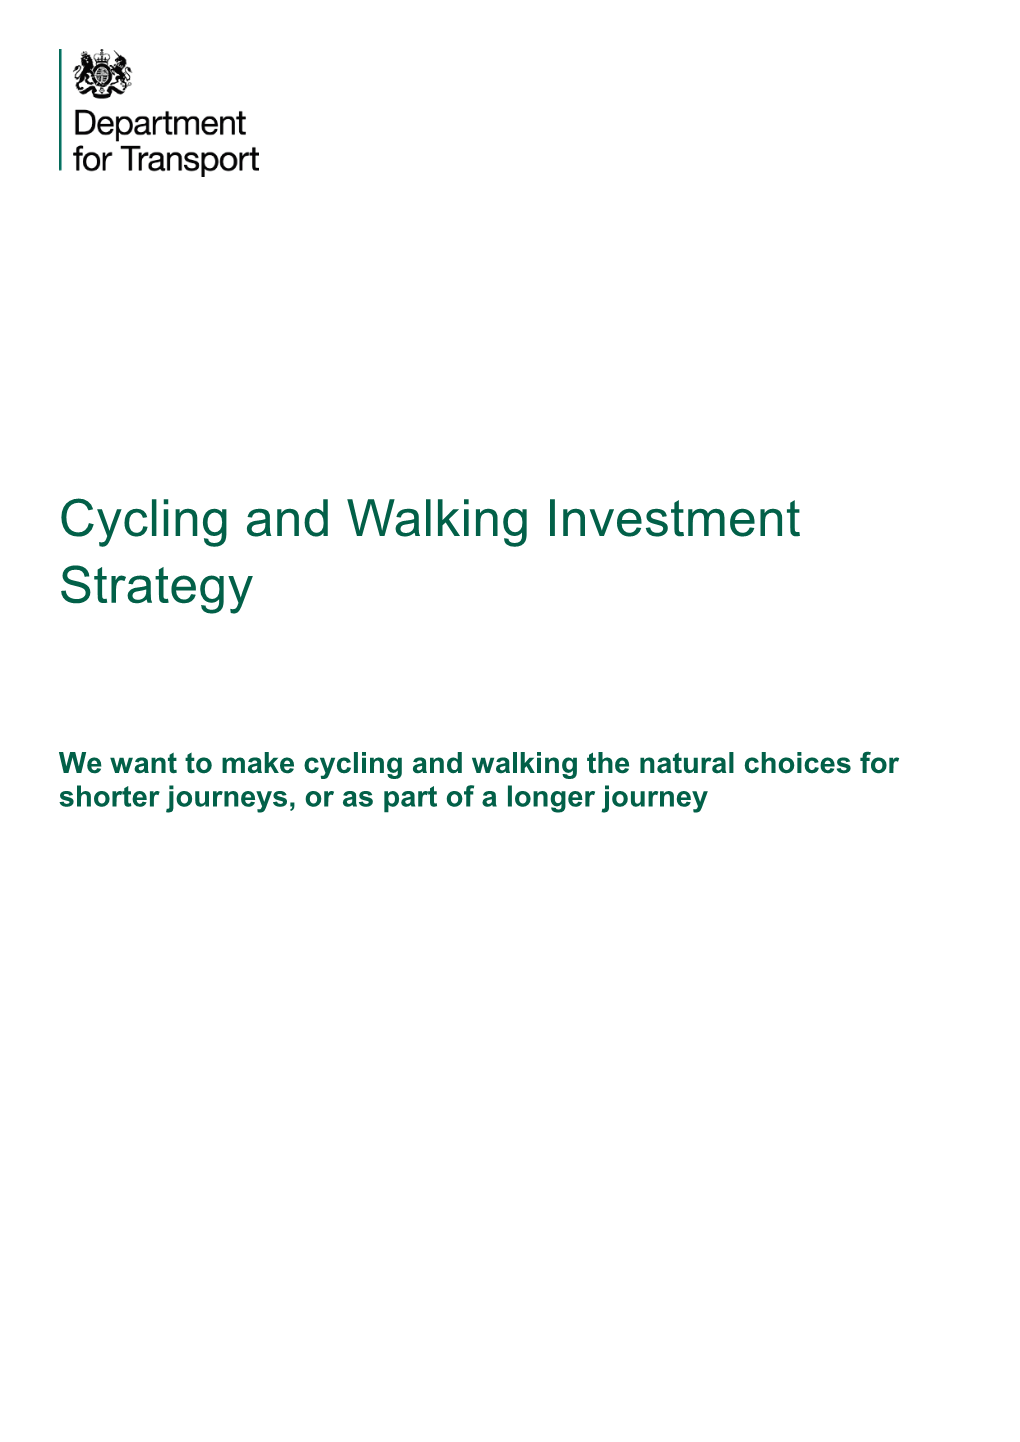 Cycling and Walking Investment Strategy - Marks the Beginning of This Transformation